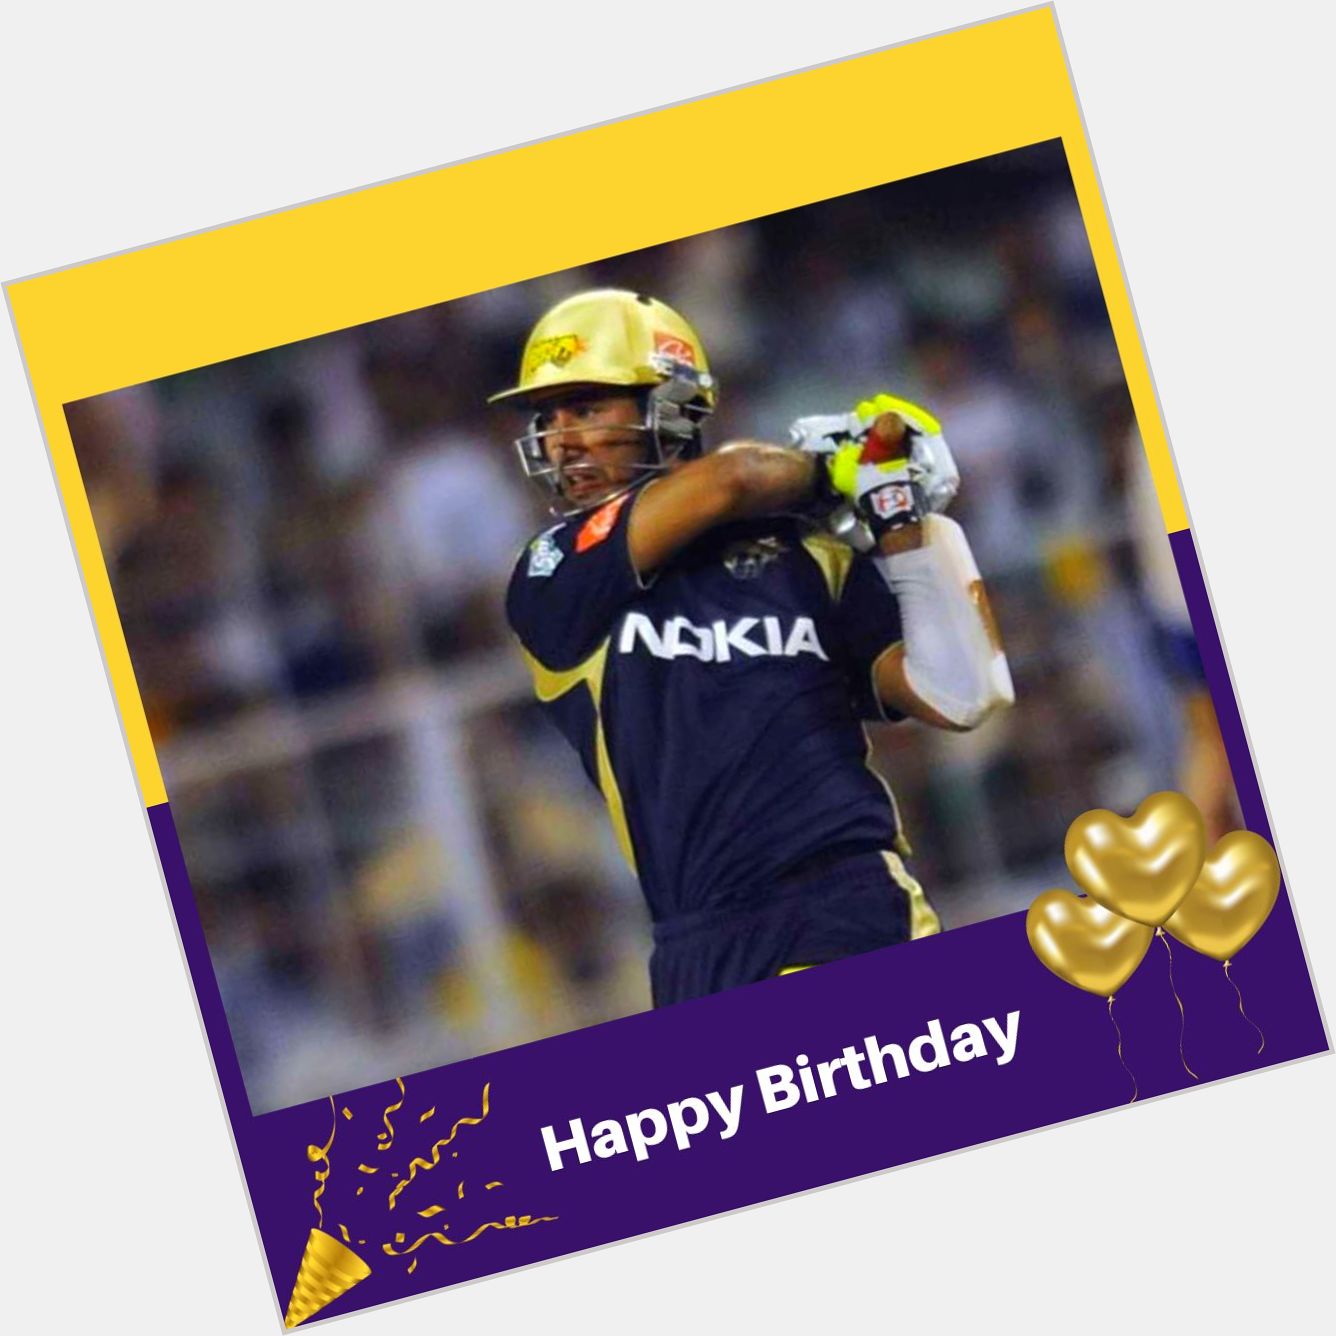 Wishing a very happy birthday to our former Knight, Cheteshwar Pujara.

He made 10 appearances for KKR. 